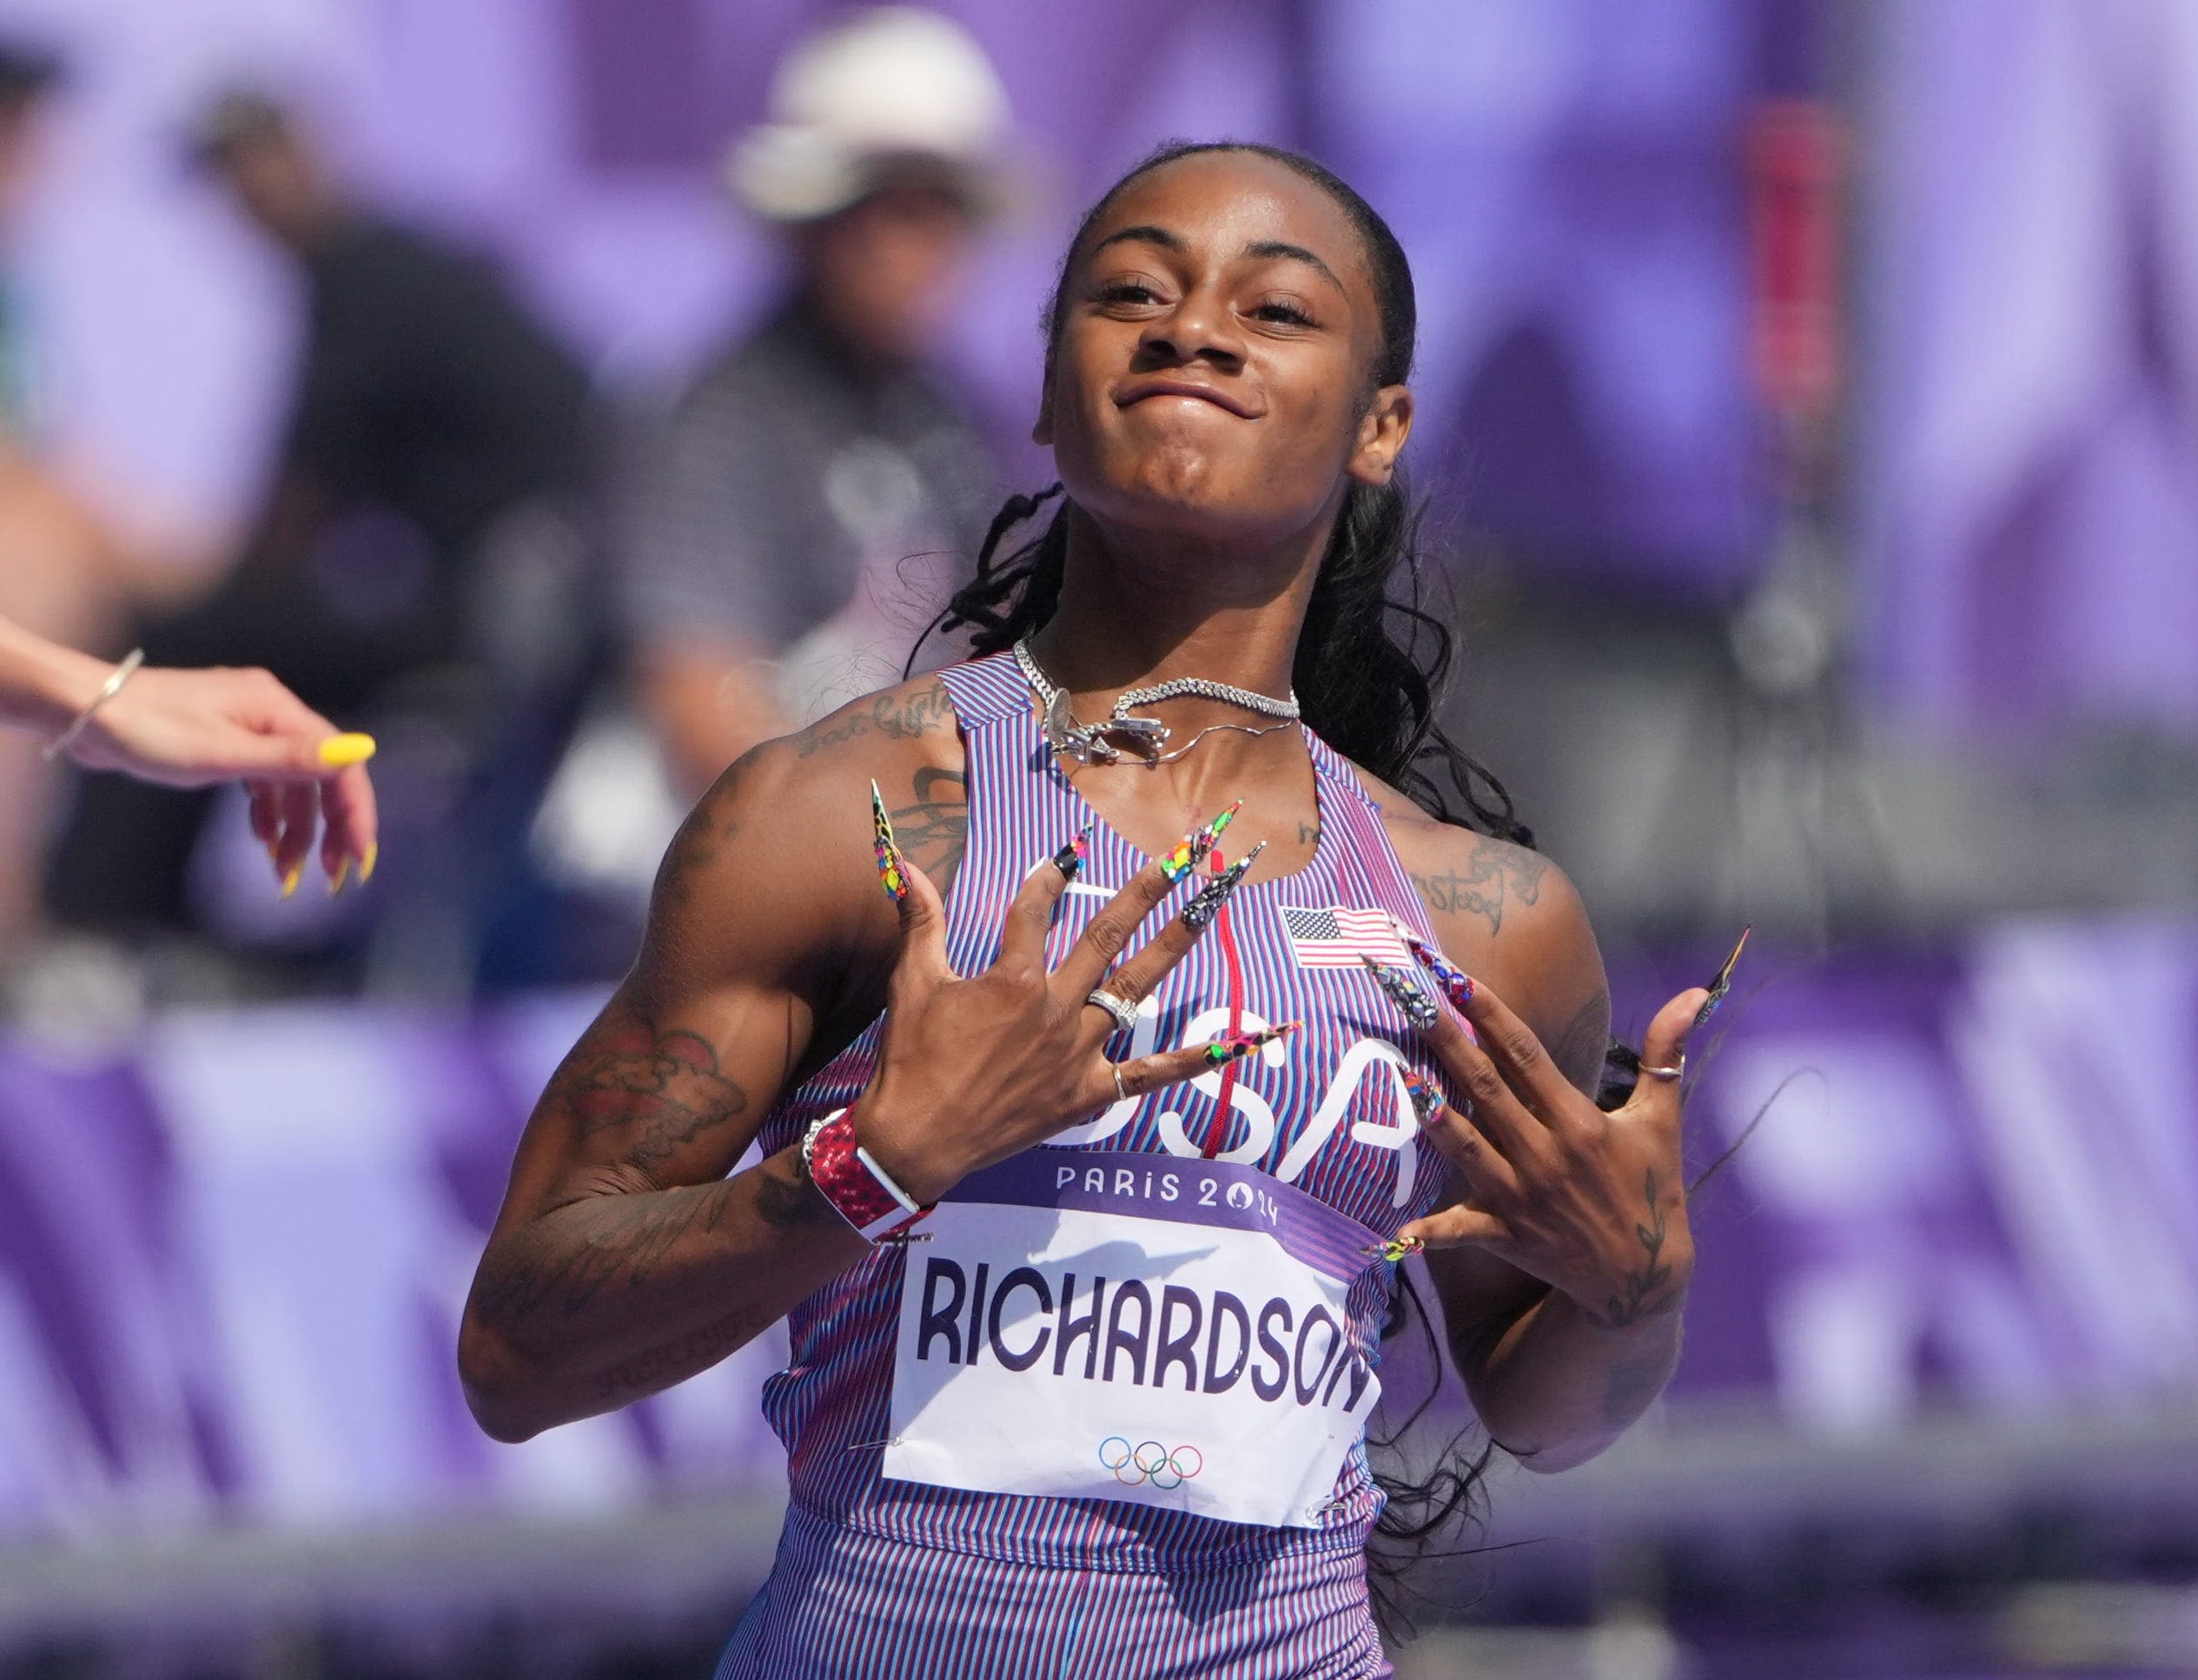 Sha'Carri Richardson wins her women's 100m opening heat with ease